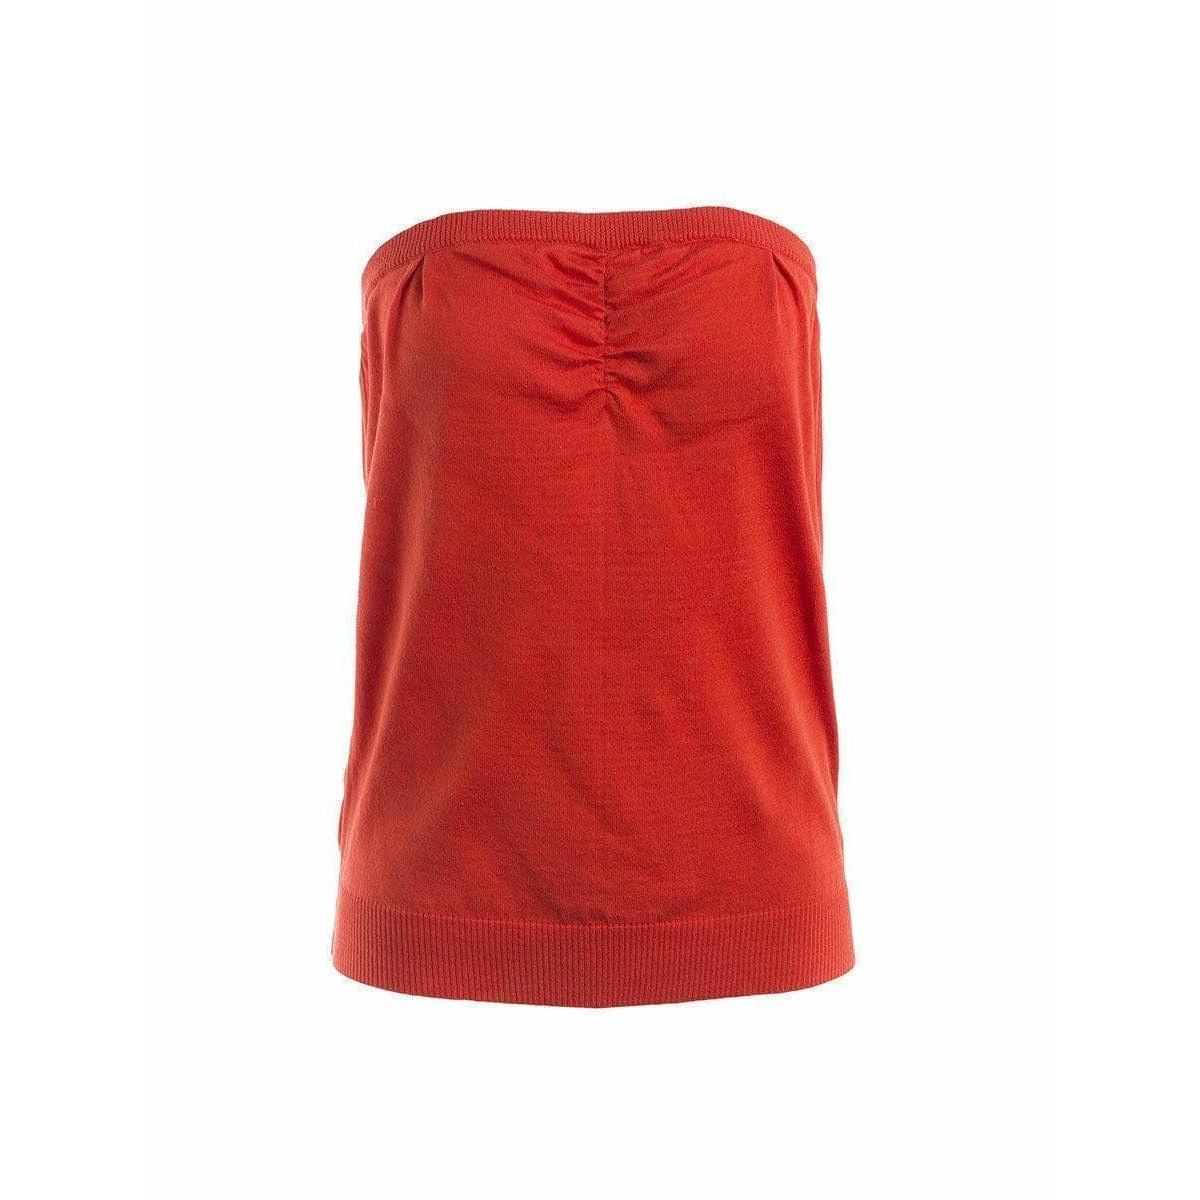 ruched-tube-top-in-red Shirts & Tops Firebrick